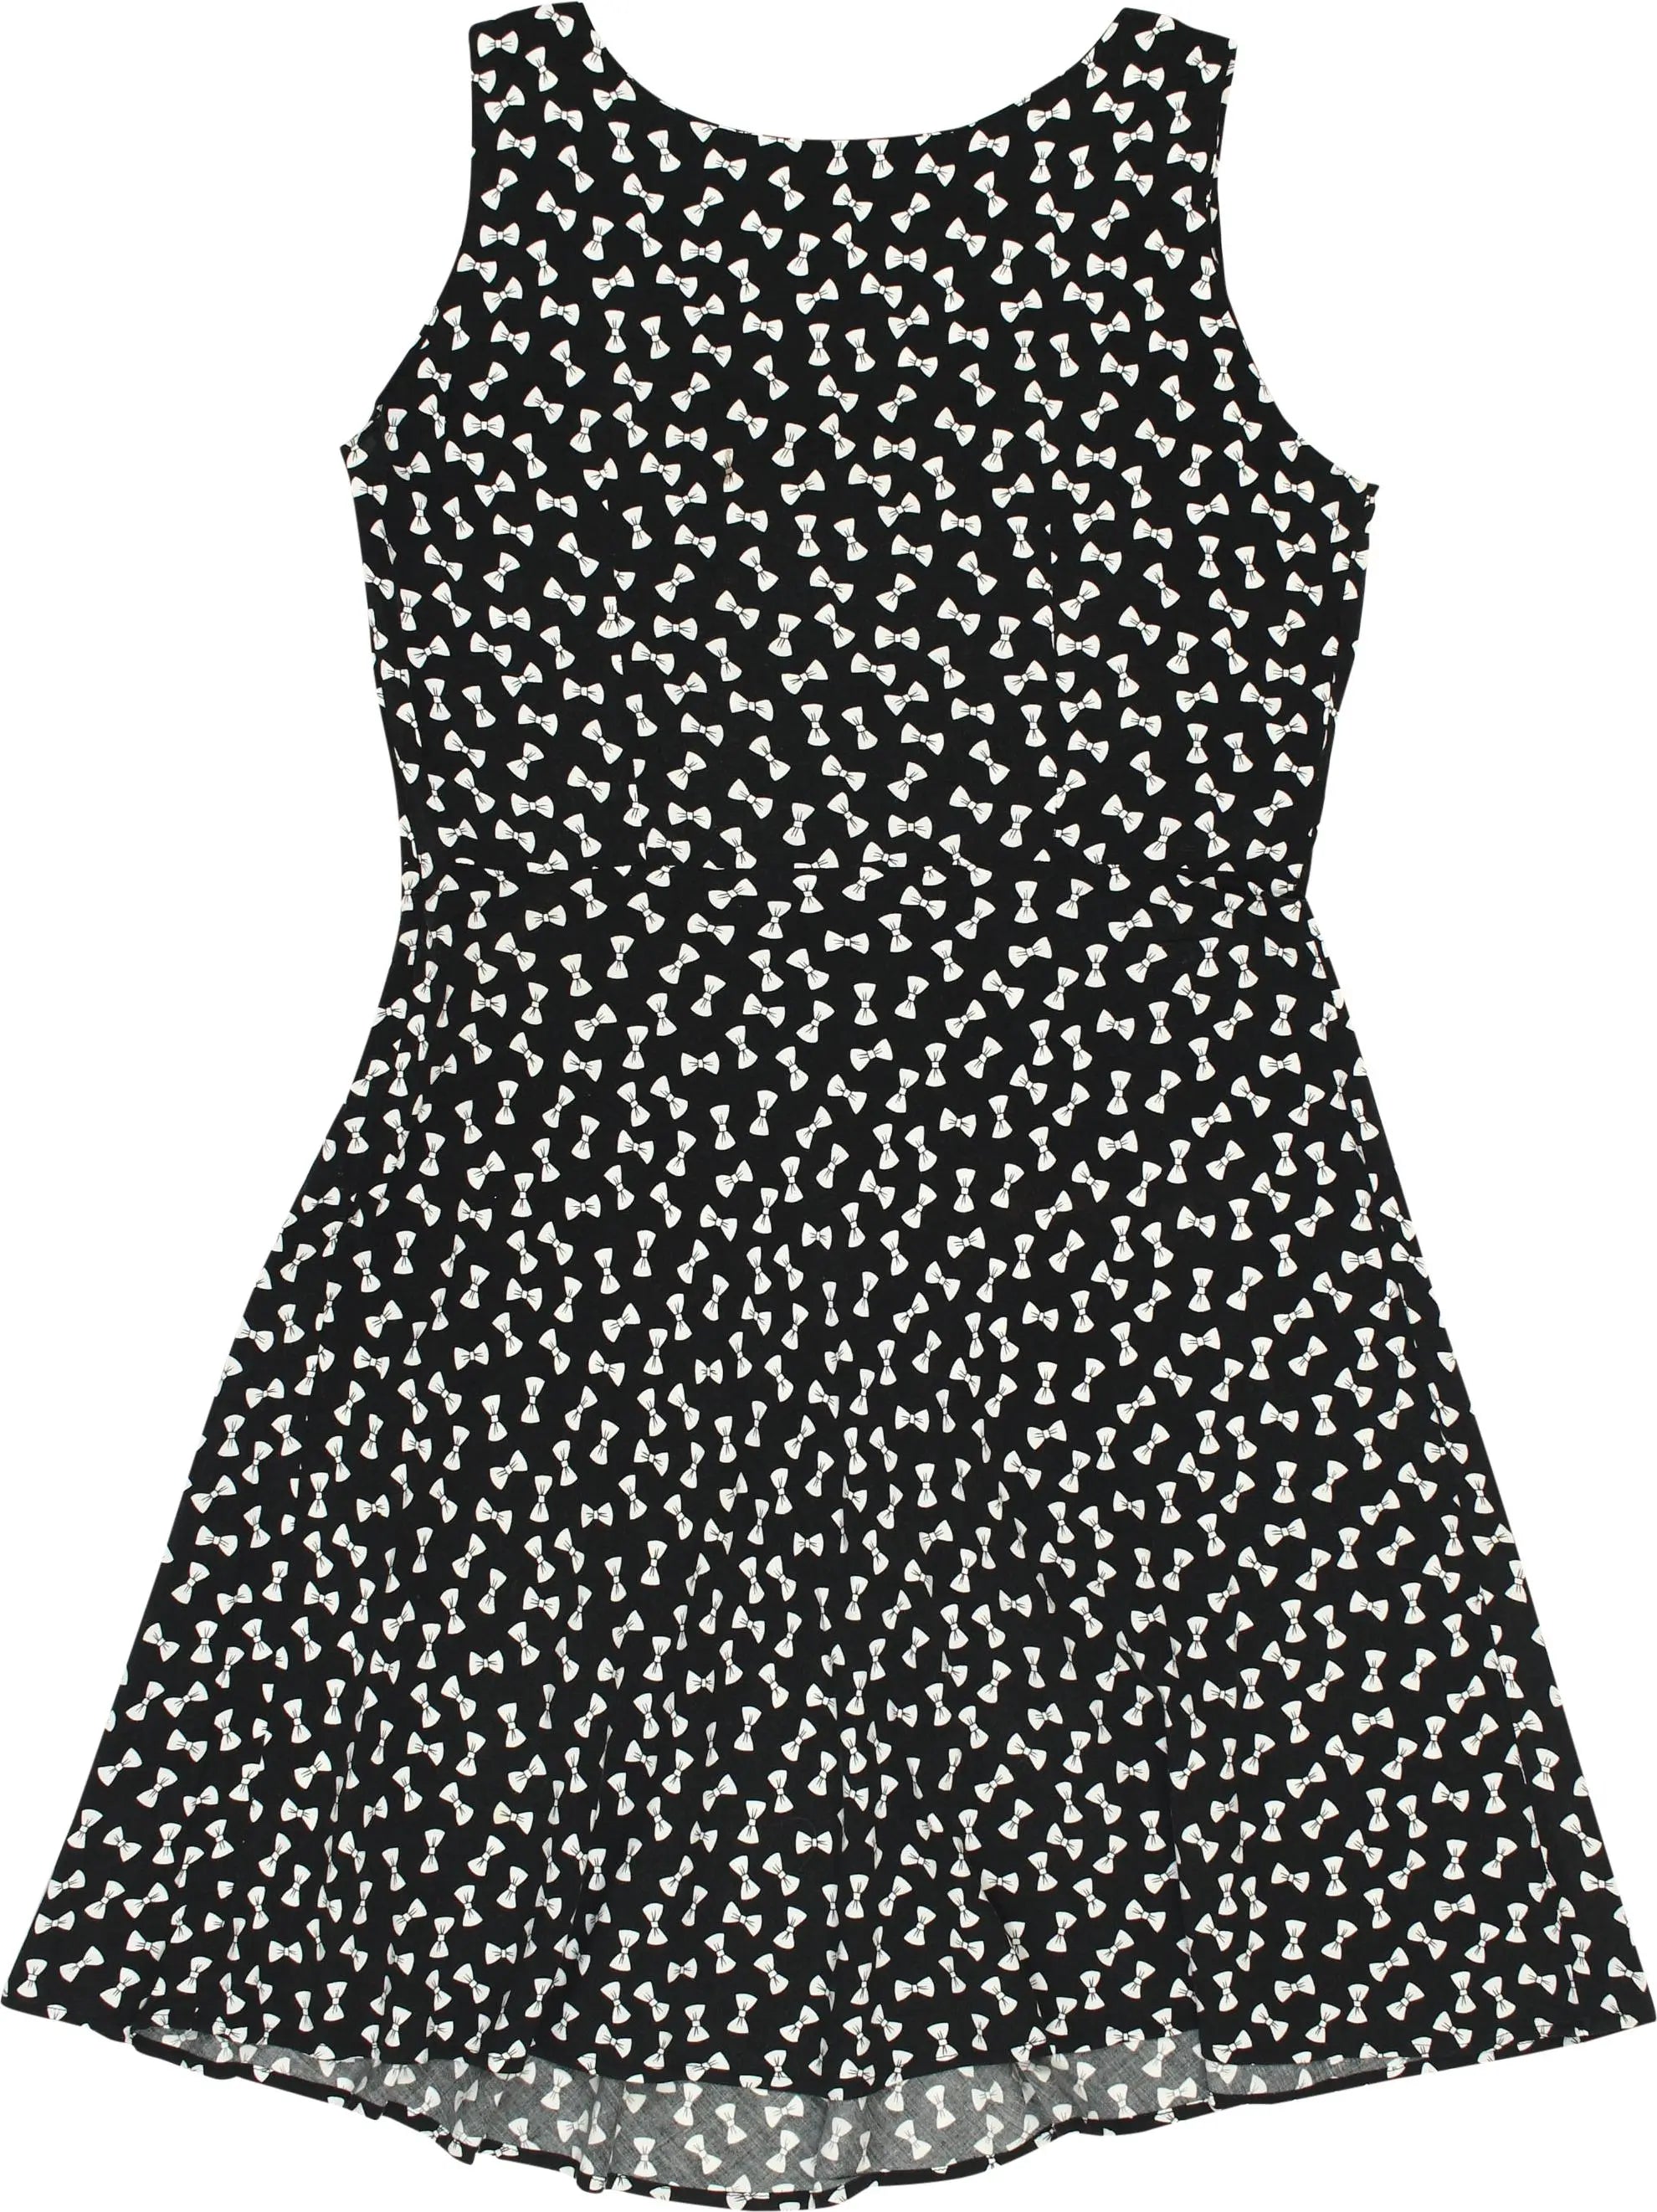 Unknown - Short Dress with Bow Print- ThriftTale.com - Vintage and second handclothing